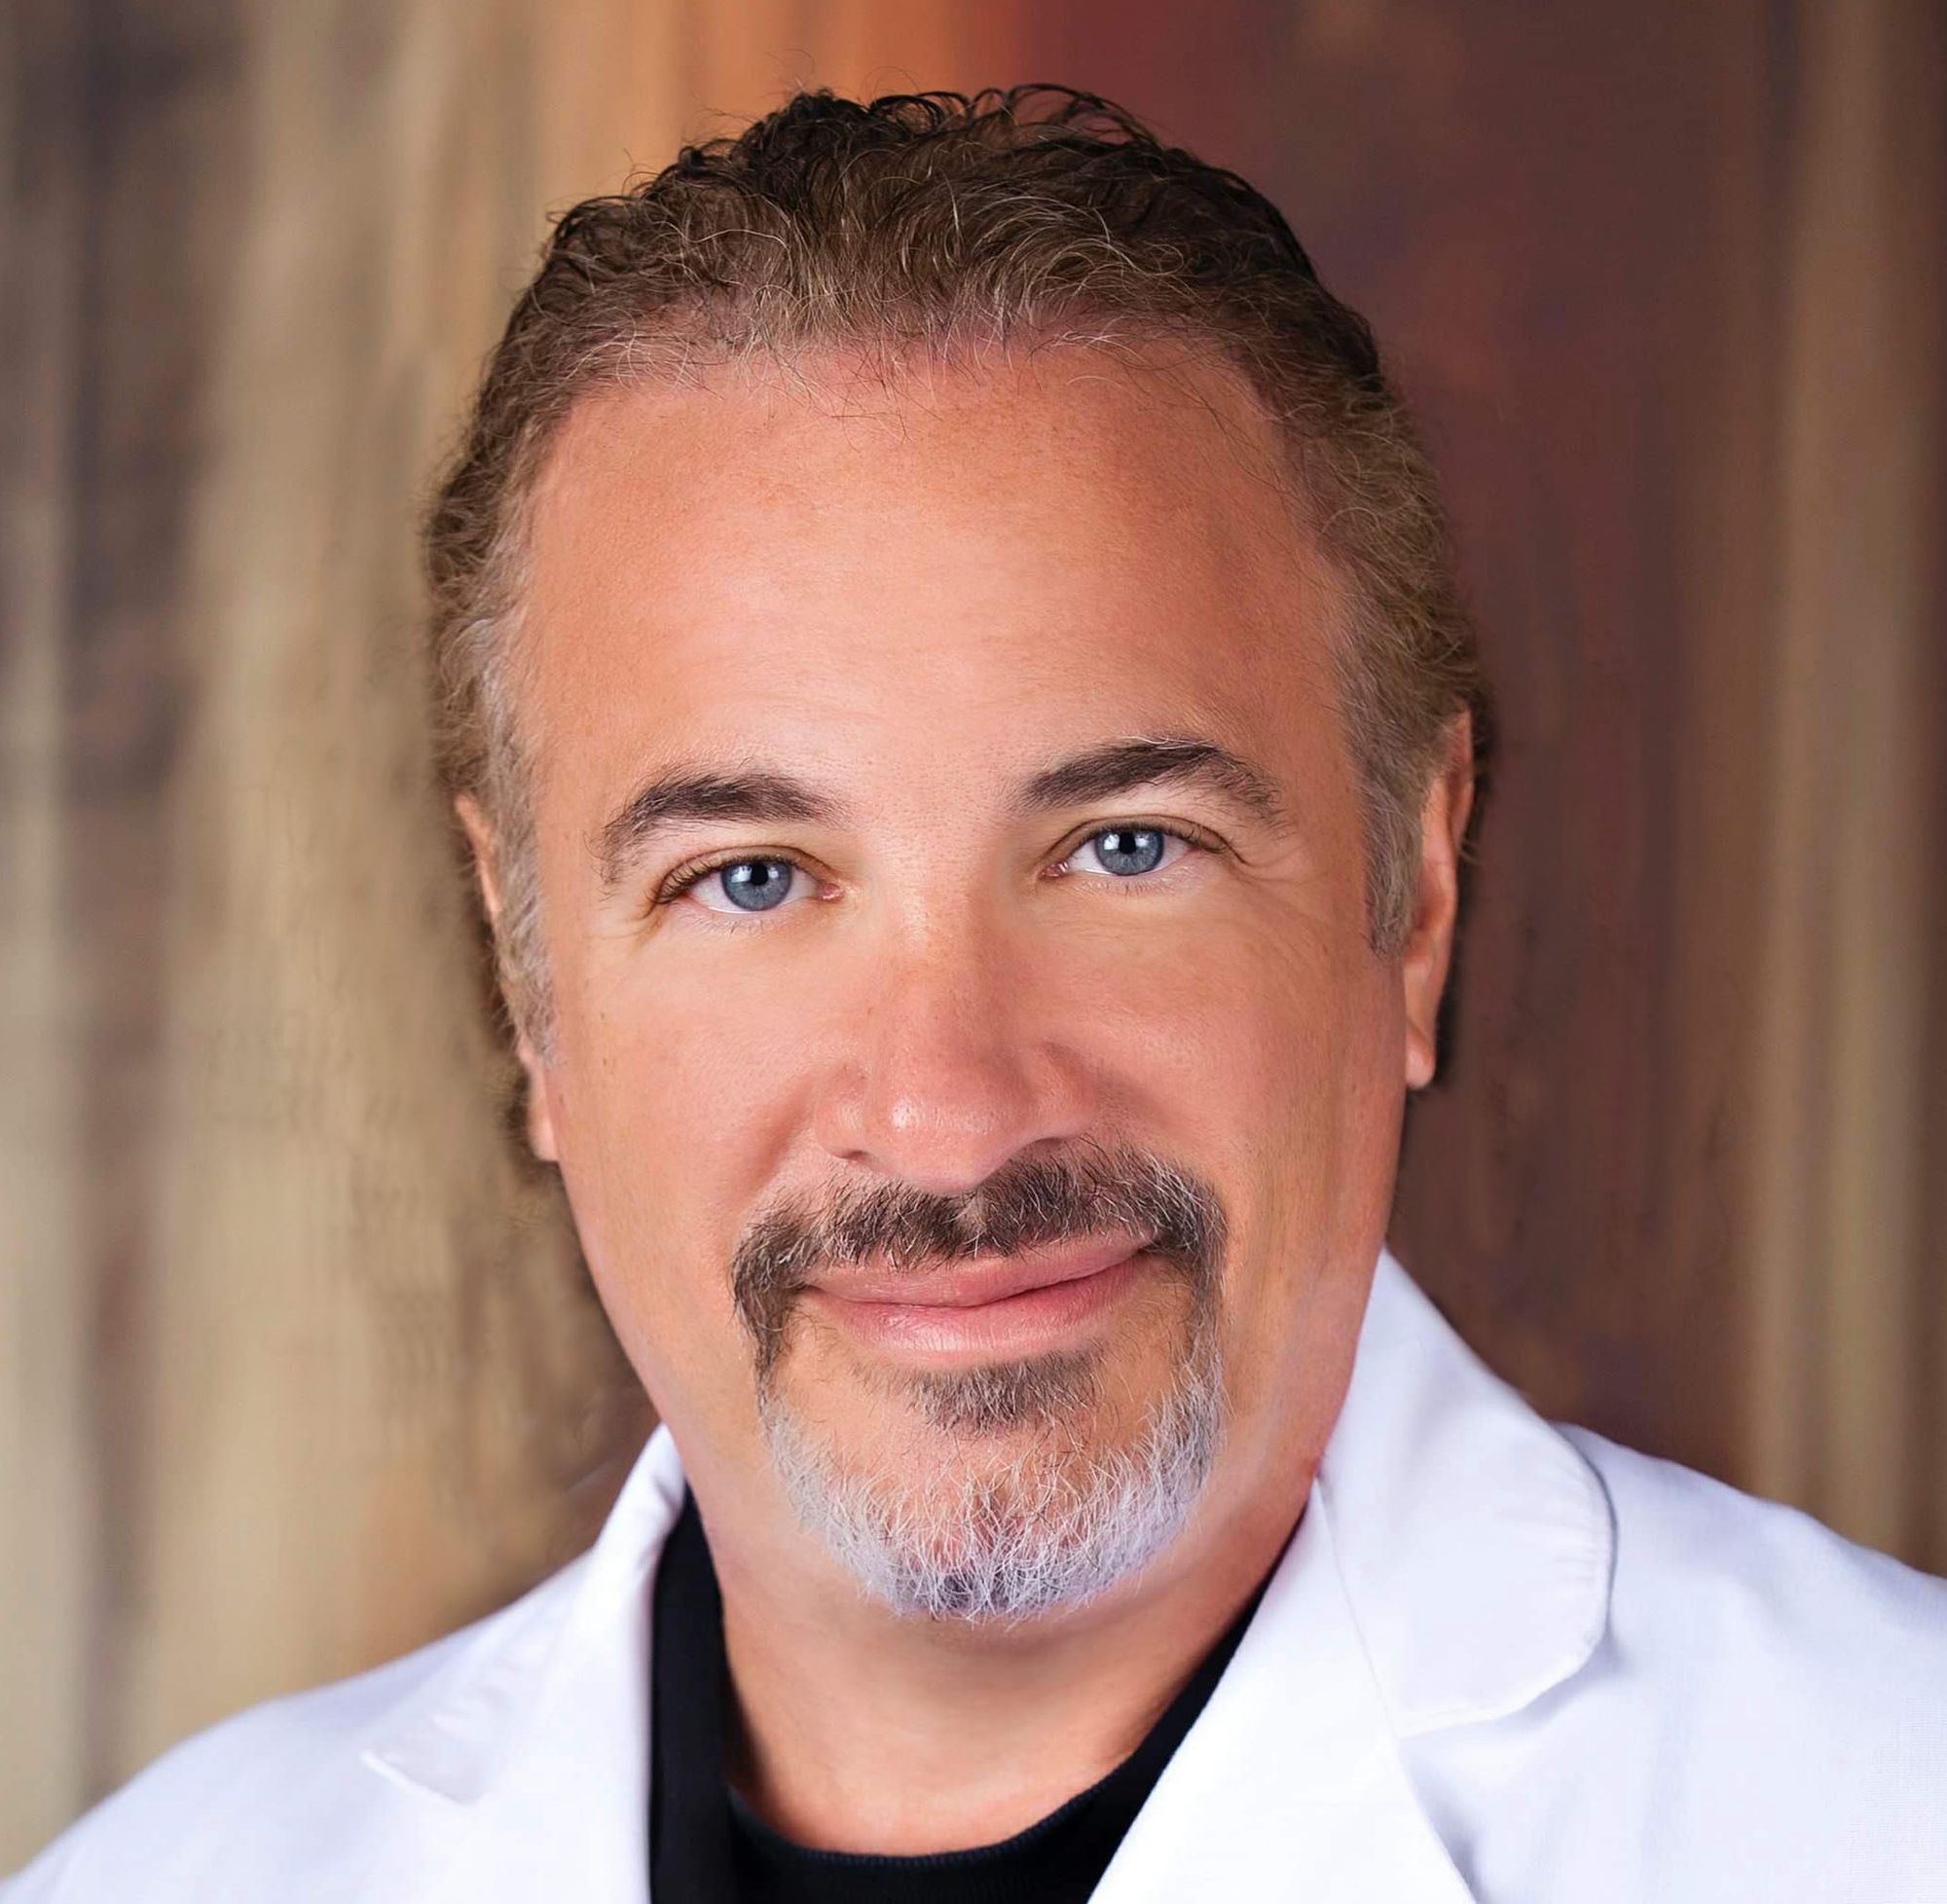 Take control of your health with culinary medicine - Michael Fenster